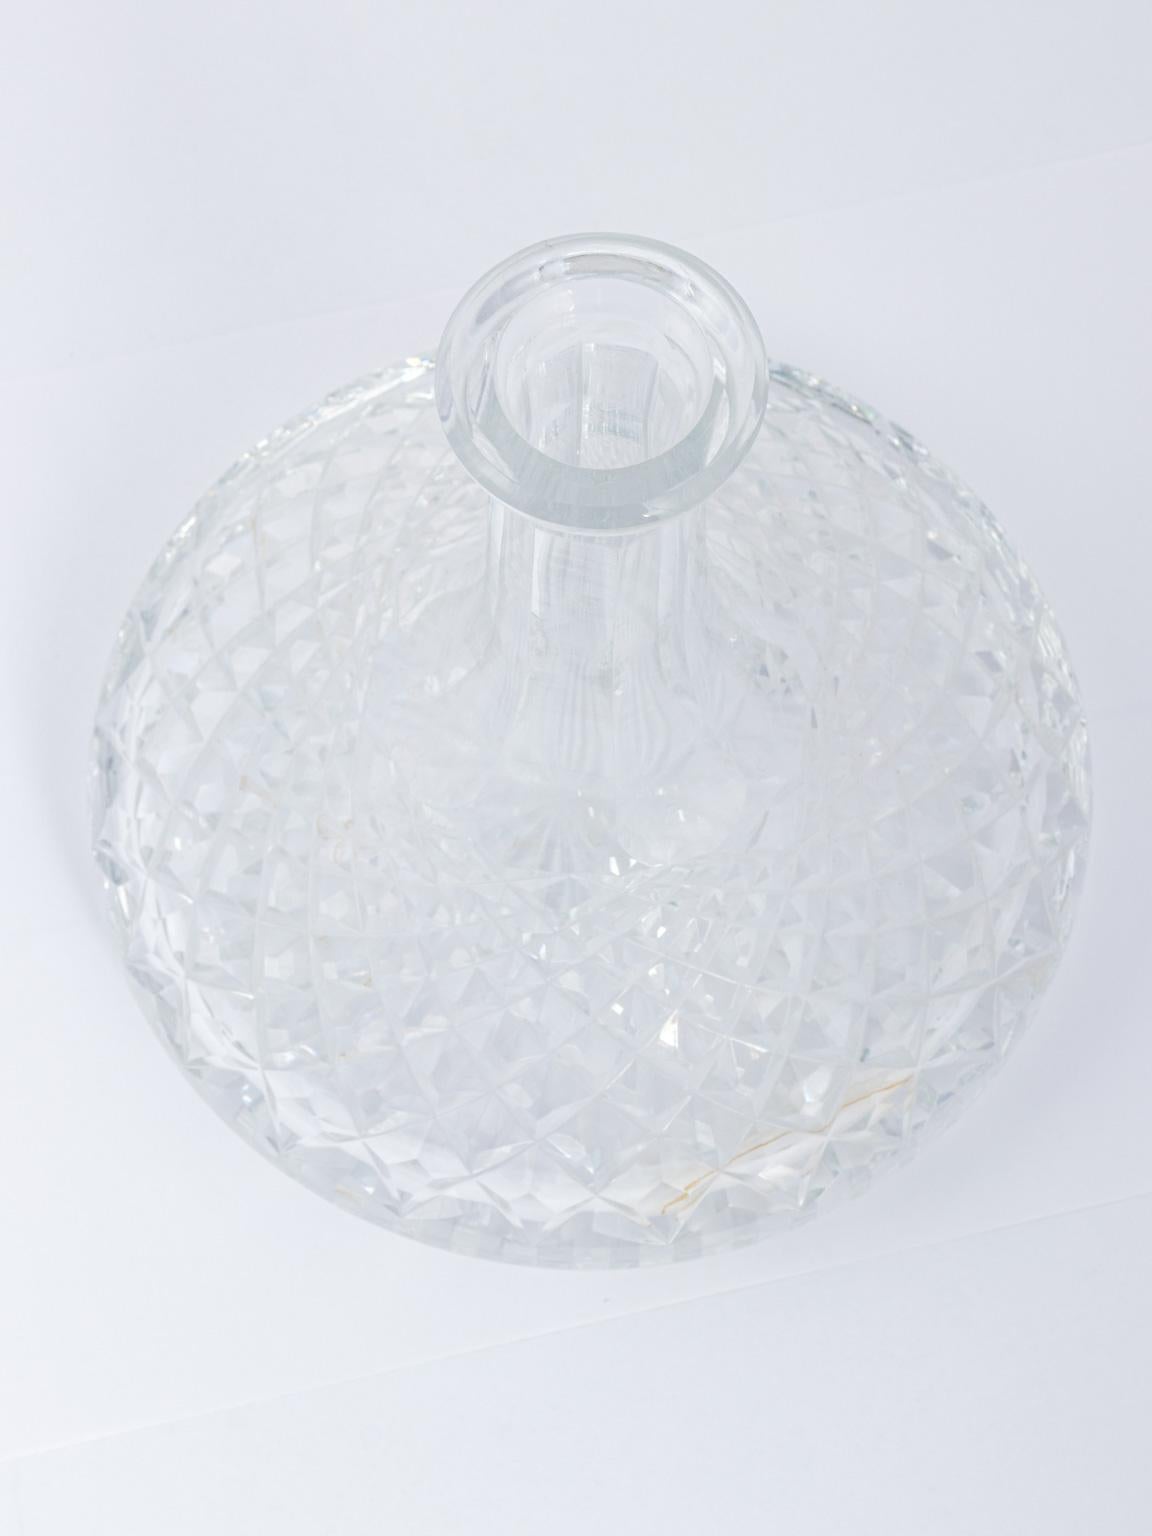 Pair of Cut Crystal Decanters 3